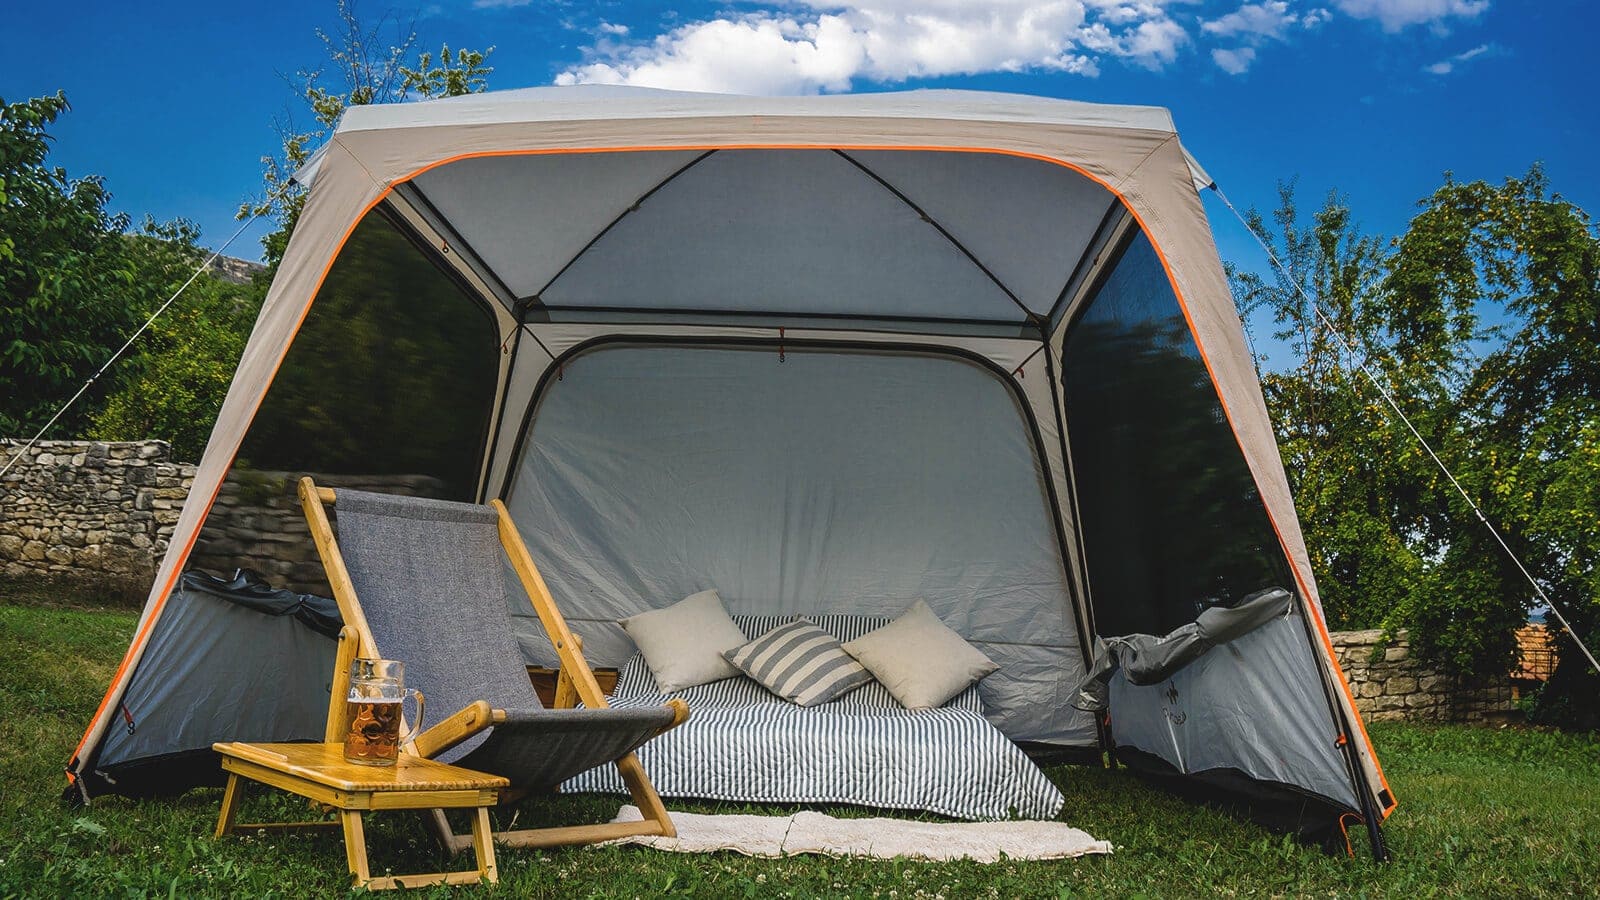 Reviewed: The Best Camping Tents With Screened Porch Of 2022